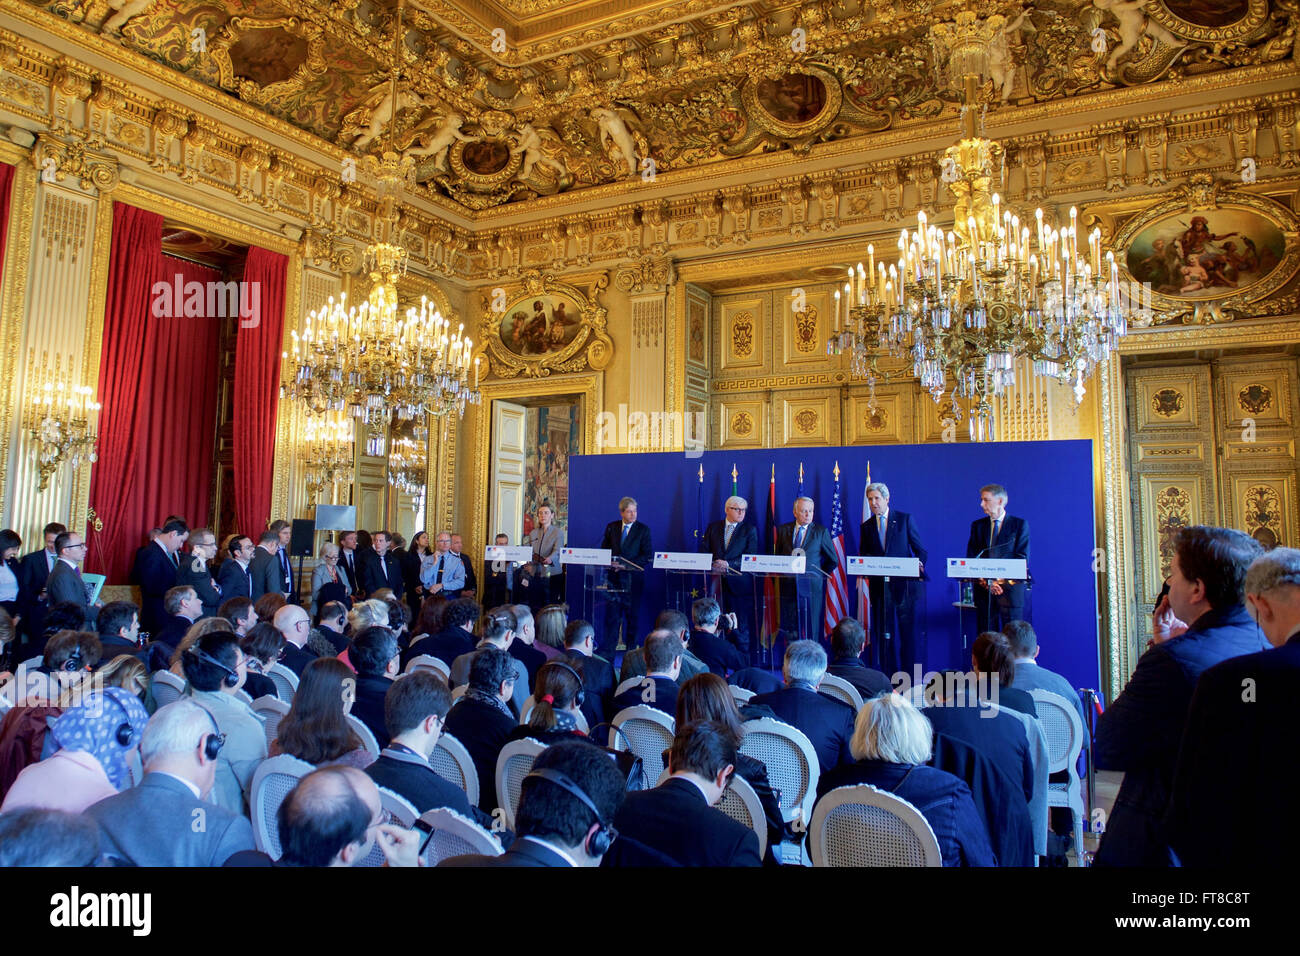 U.S. Secretary of State John Kerry addresses reporters on March 13, 2015, at the Quai d'Orsay in Paris, France, after he and his counterparts held an E4+1 meeting - including representatives of France, Germany, Italy, the United Kingdom, and European Union - focused on Syria, Libya, Yemen, Ukraine, and other foreign policy matters. [State Department Photo/Public Domain] Stock Photo